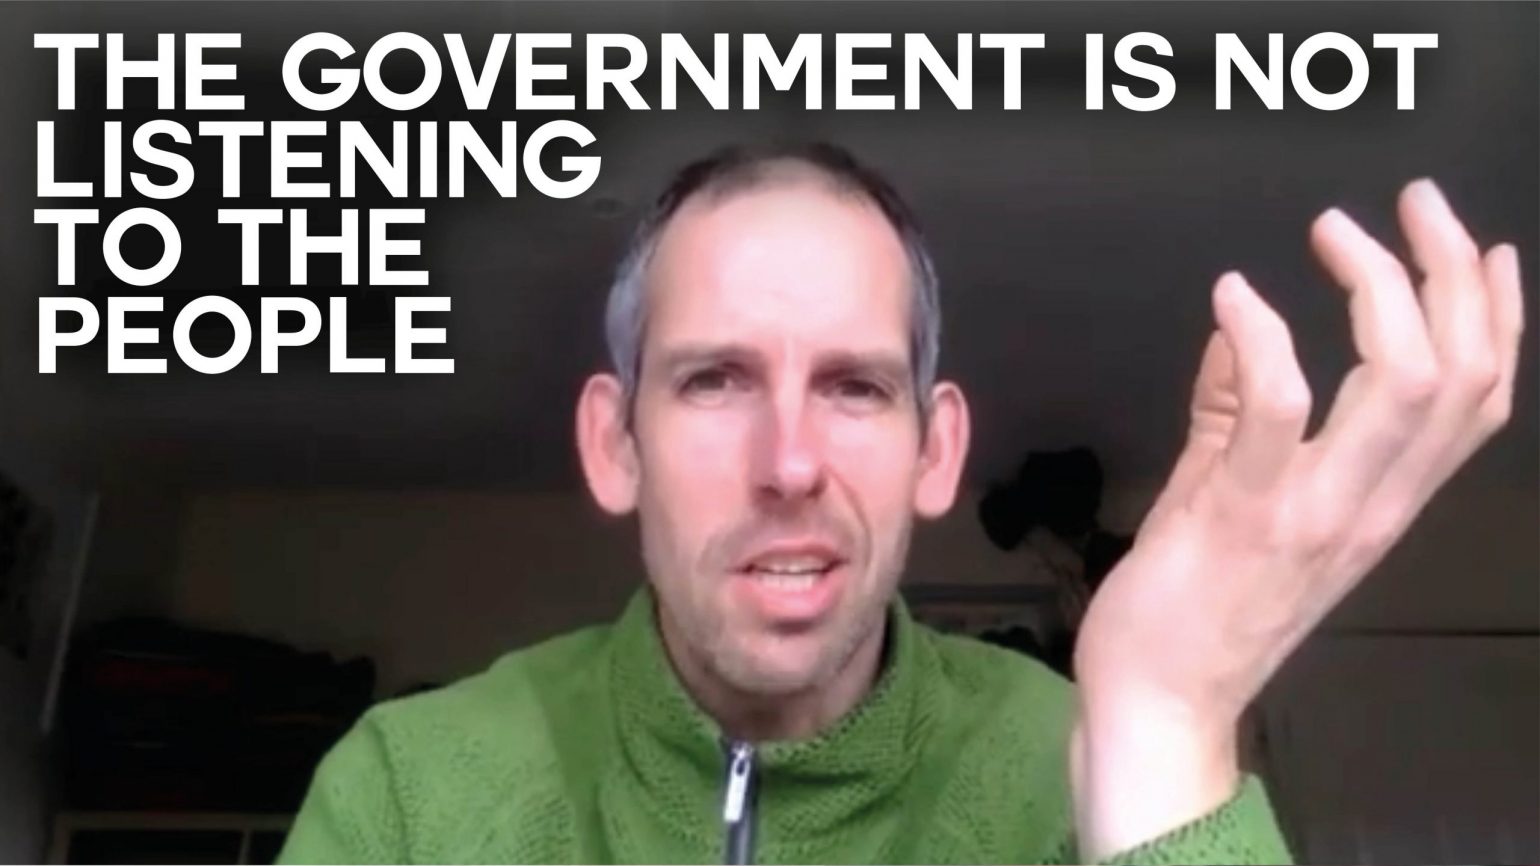 A still of an interview with Extinction Rebellion activist Etienne Stott with text overlaid reading "The government is not listening to the people"